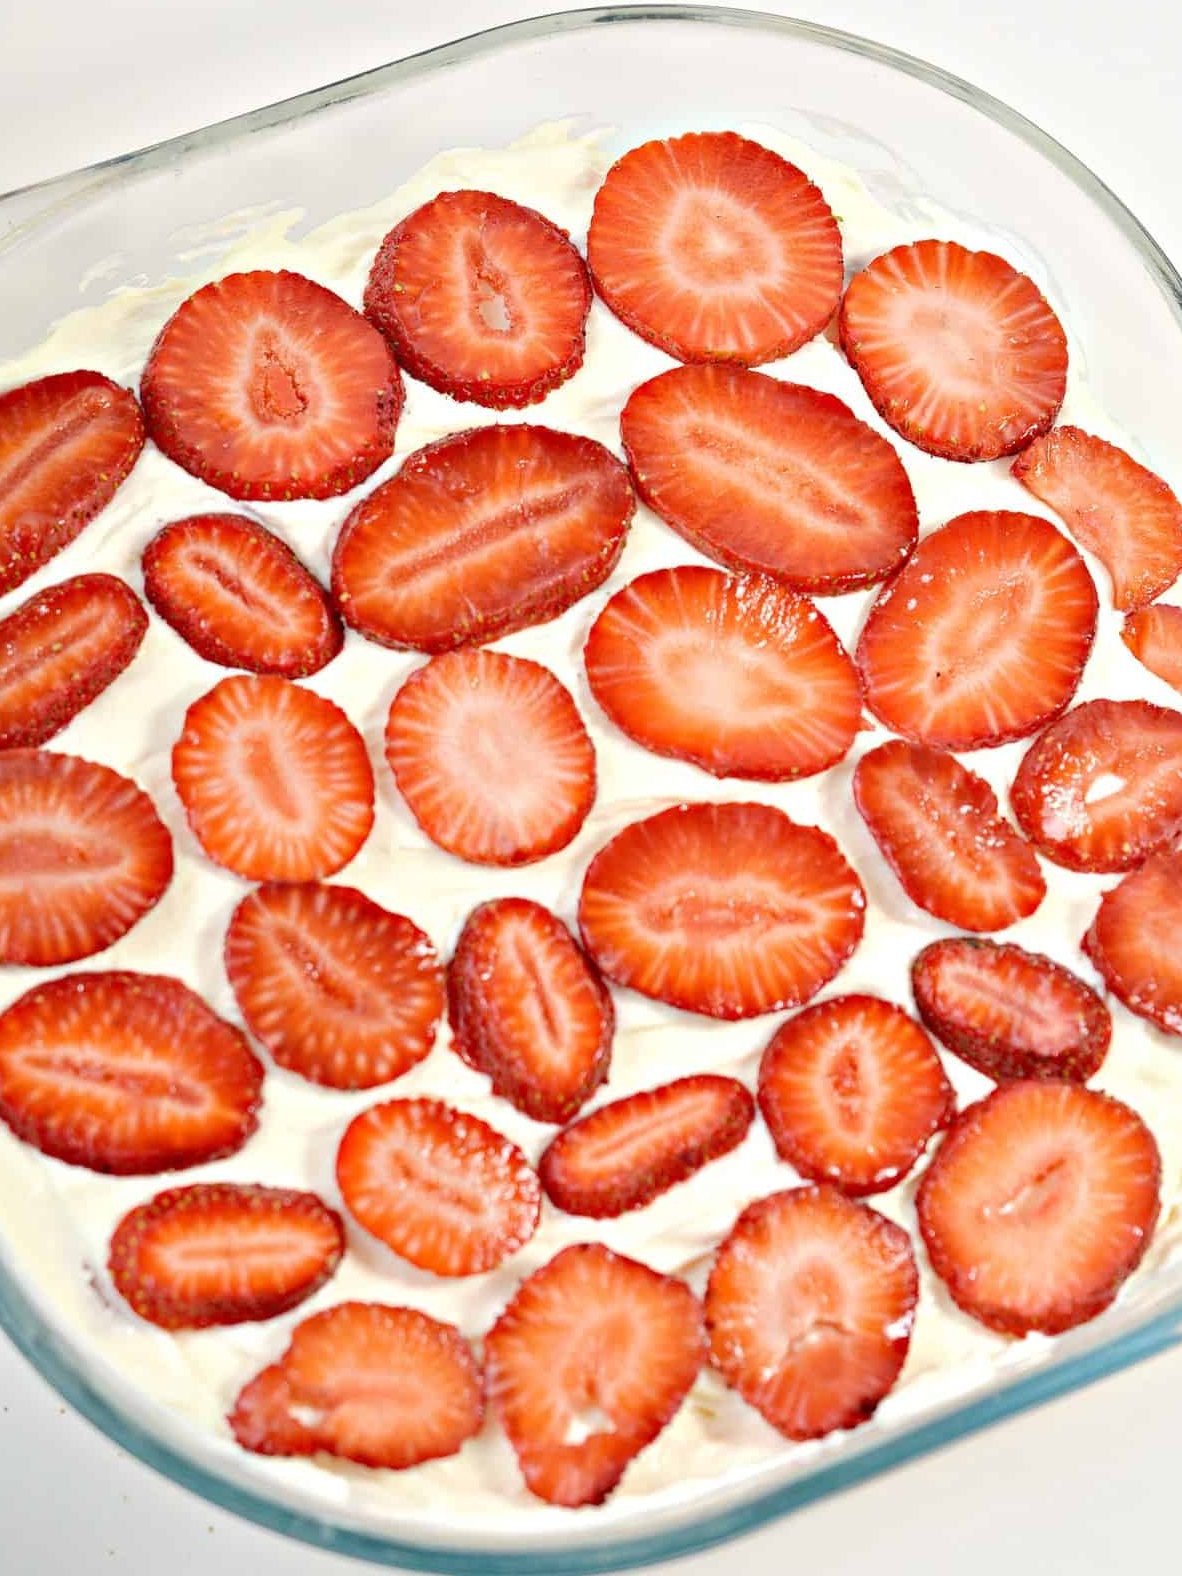 Top with a final layer of strawberry slices.